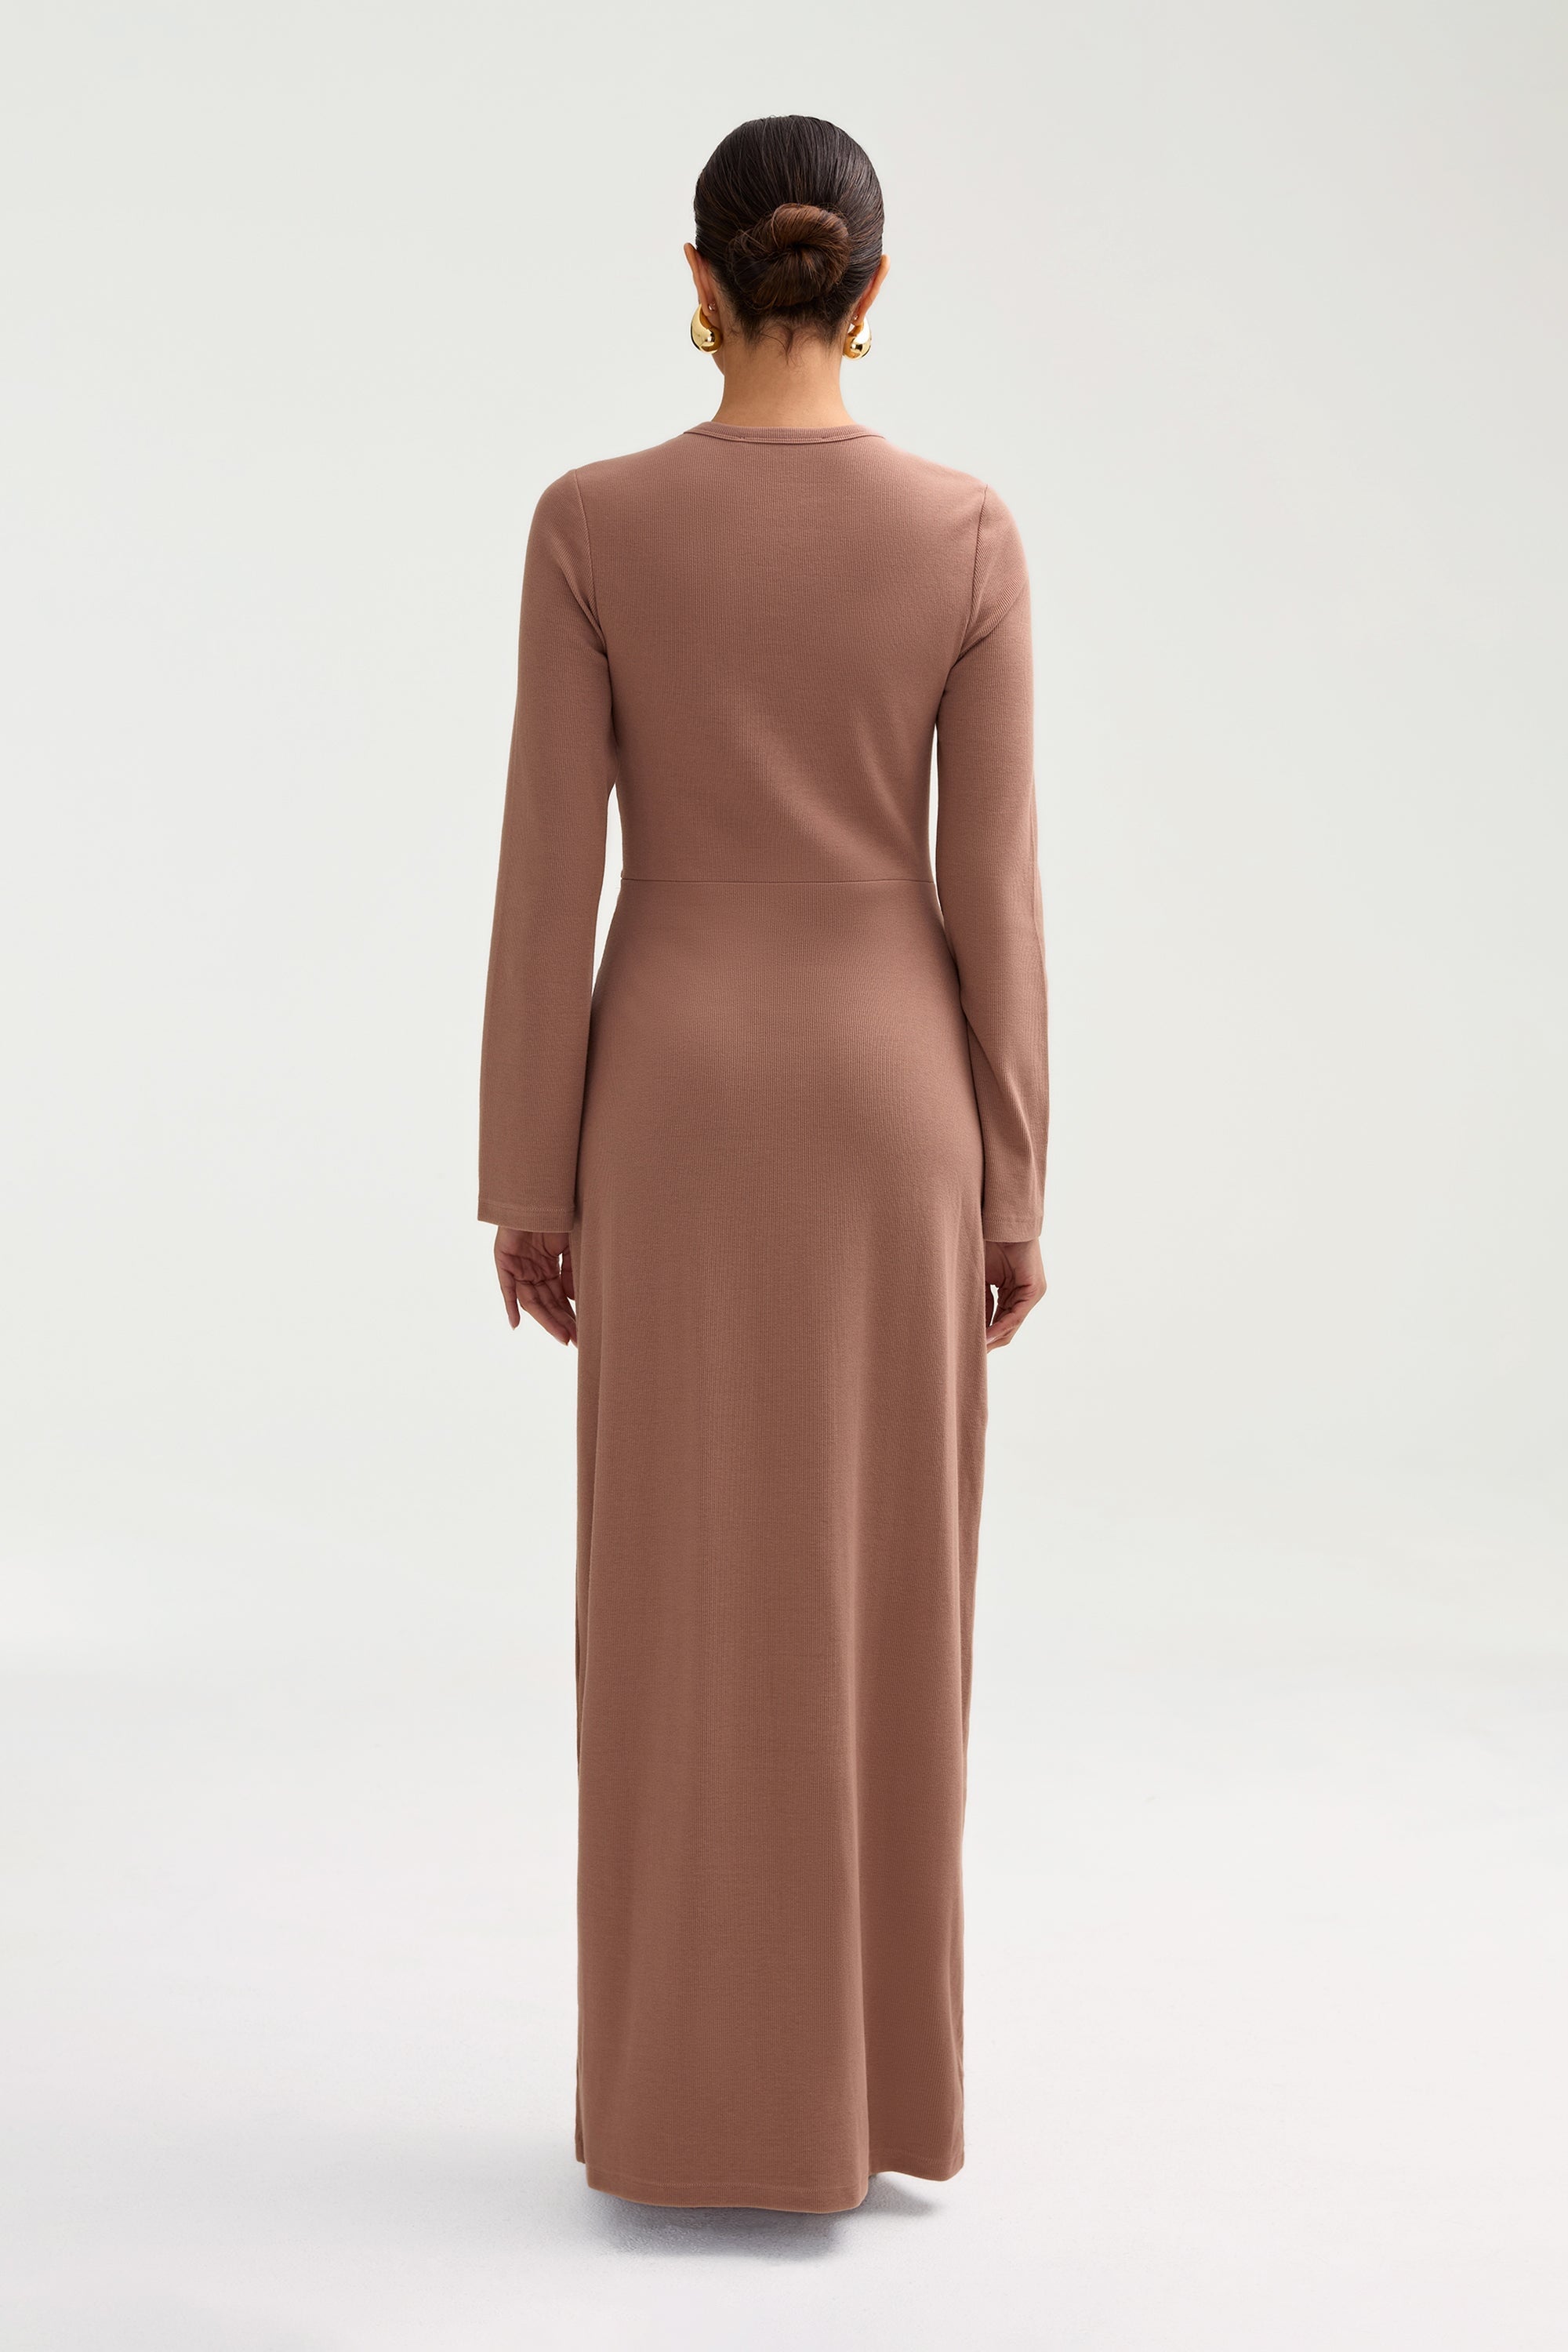 Aissia Ribbed Twist Front Maxi Dress - Brownie Clothing epschoolboard 